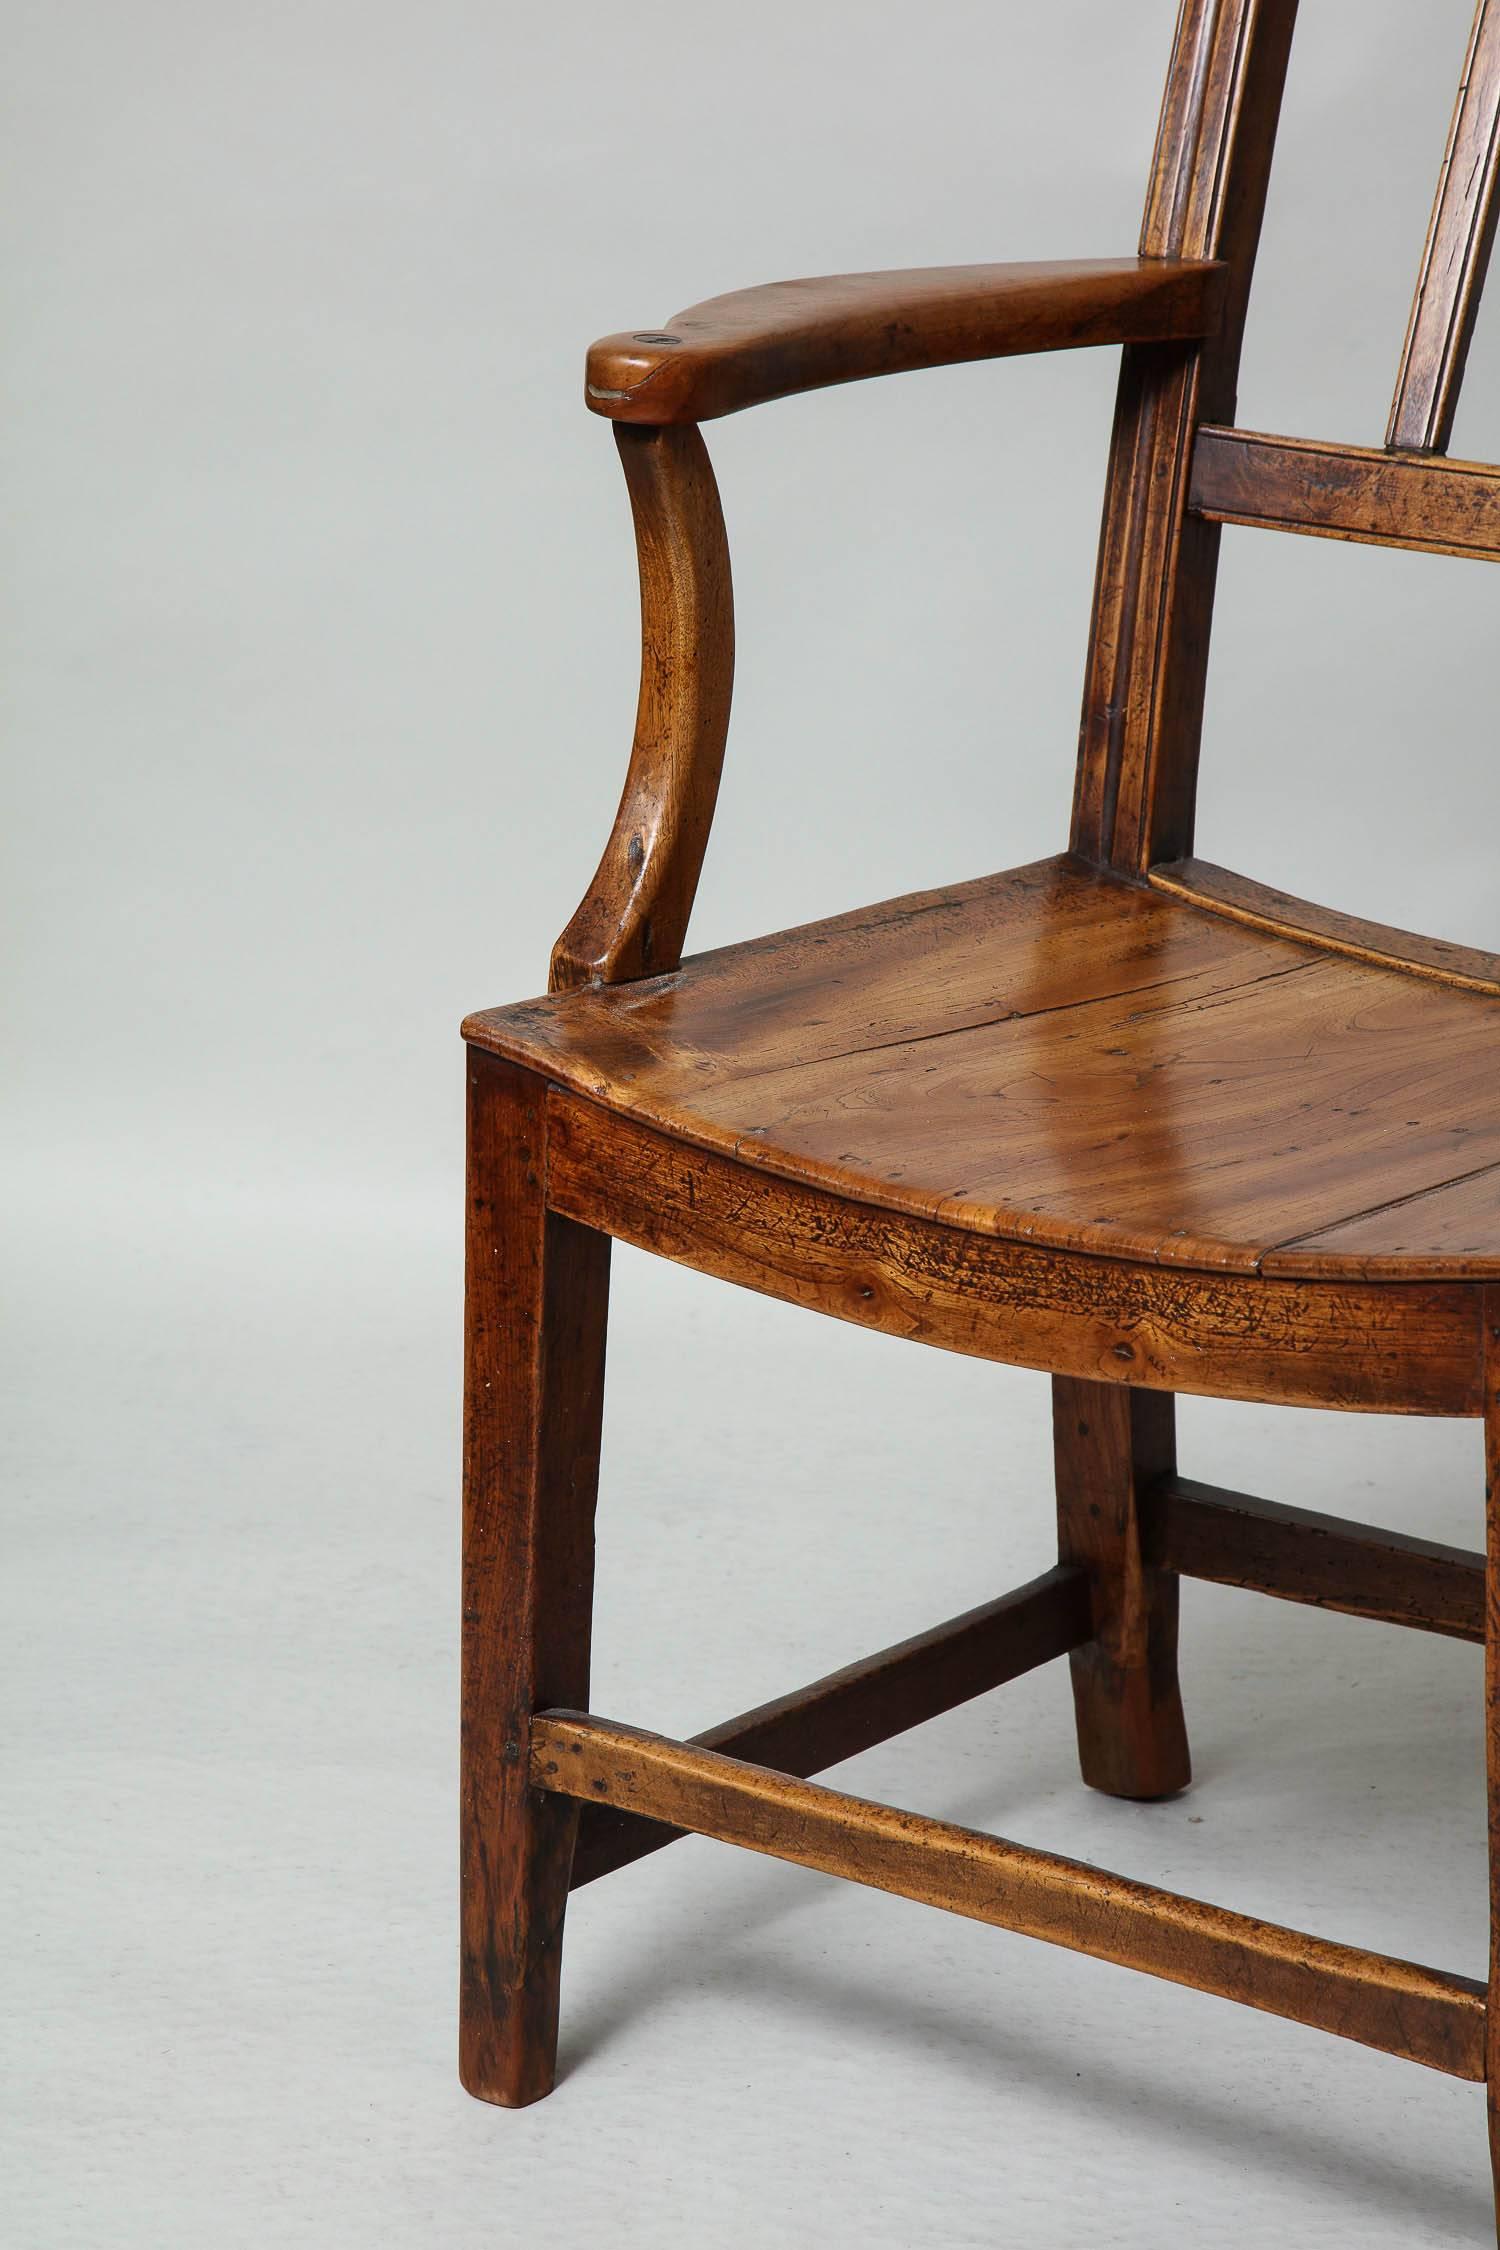 Great Britain (UK) East Anglian Fruitwood Armchair For Sale